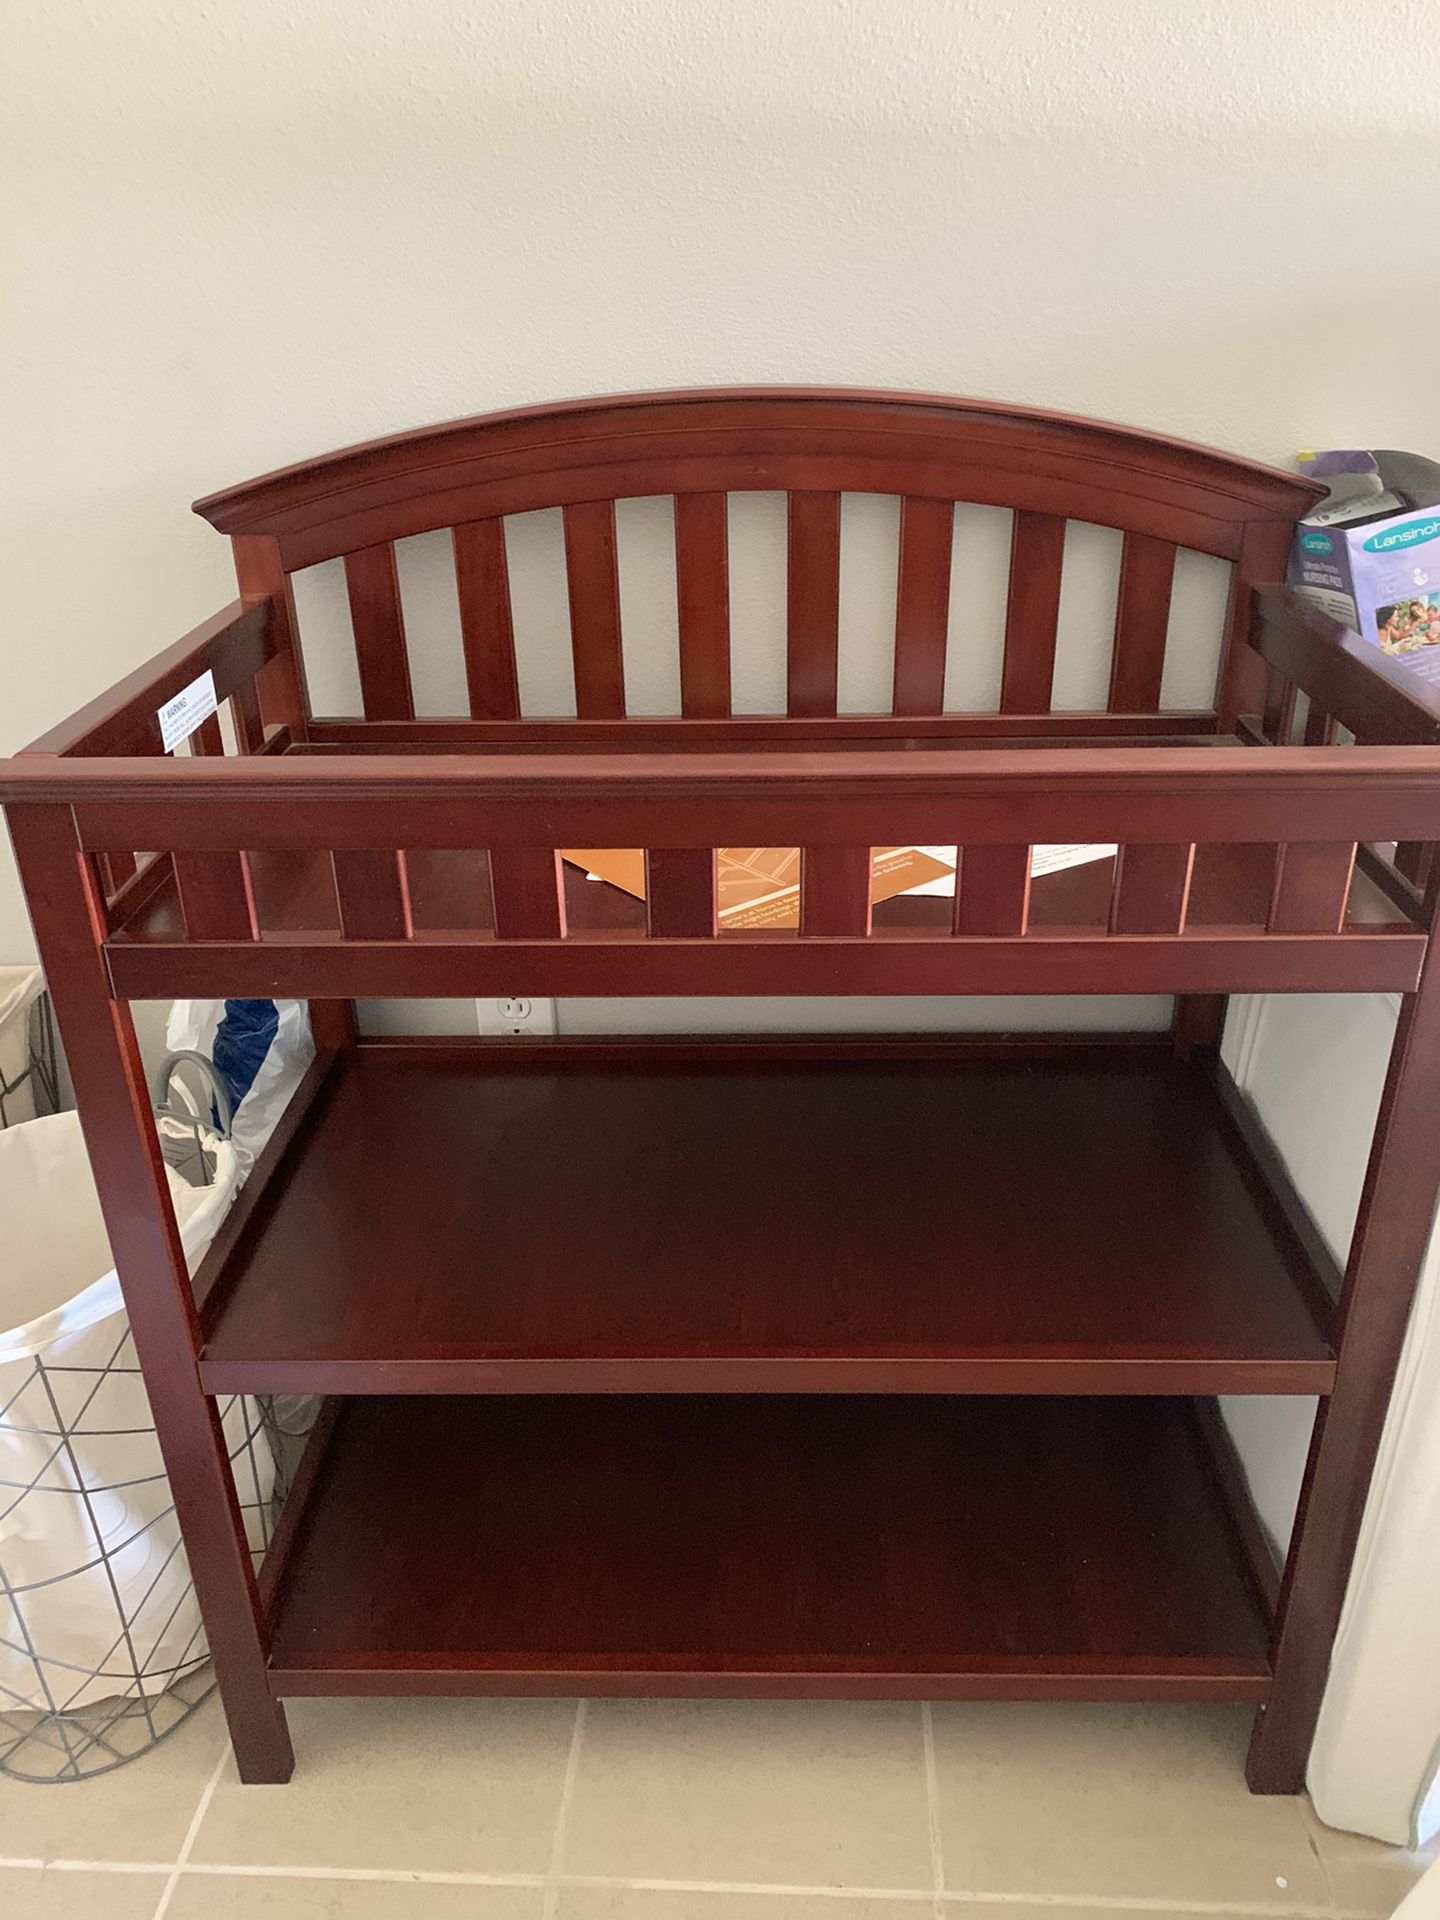 New changing table. Is assemble and ready to use.